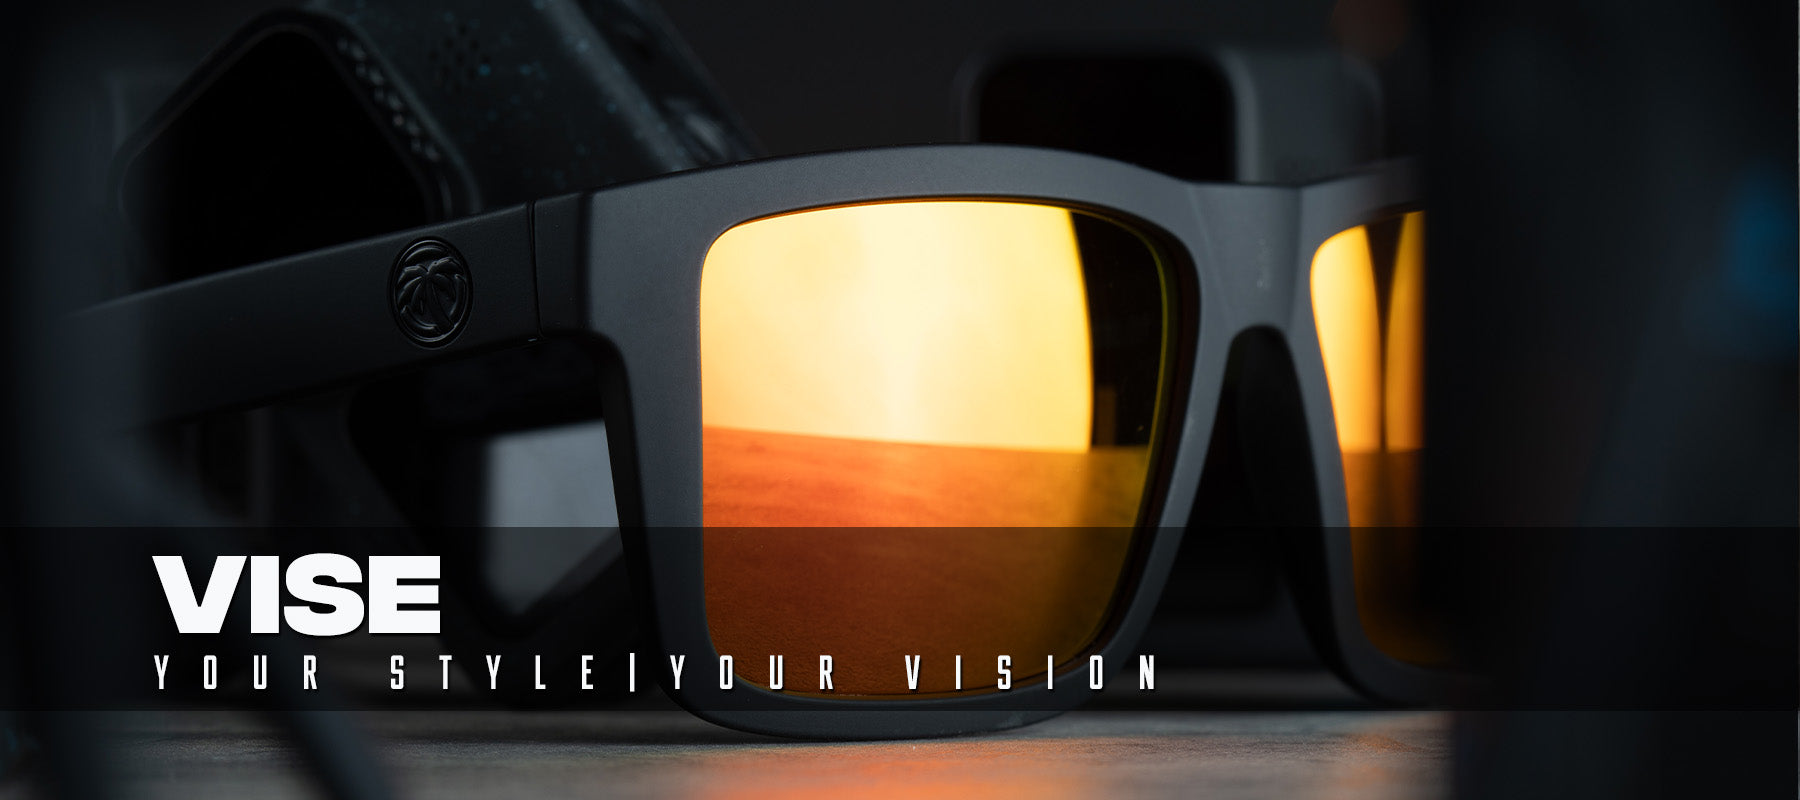 Shop Official Heat Wave Visual Australia. Free Same Day Shipping. Heat Wave Sunglasses. Your Style Your Vision. Heat Wave Protective Eyewear. Heat Wave Safety Glasses. Lazer Face. Polarized Sunglasses. Born in California Now Available In Australia